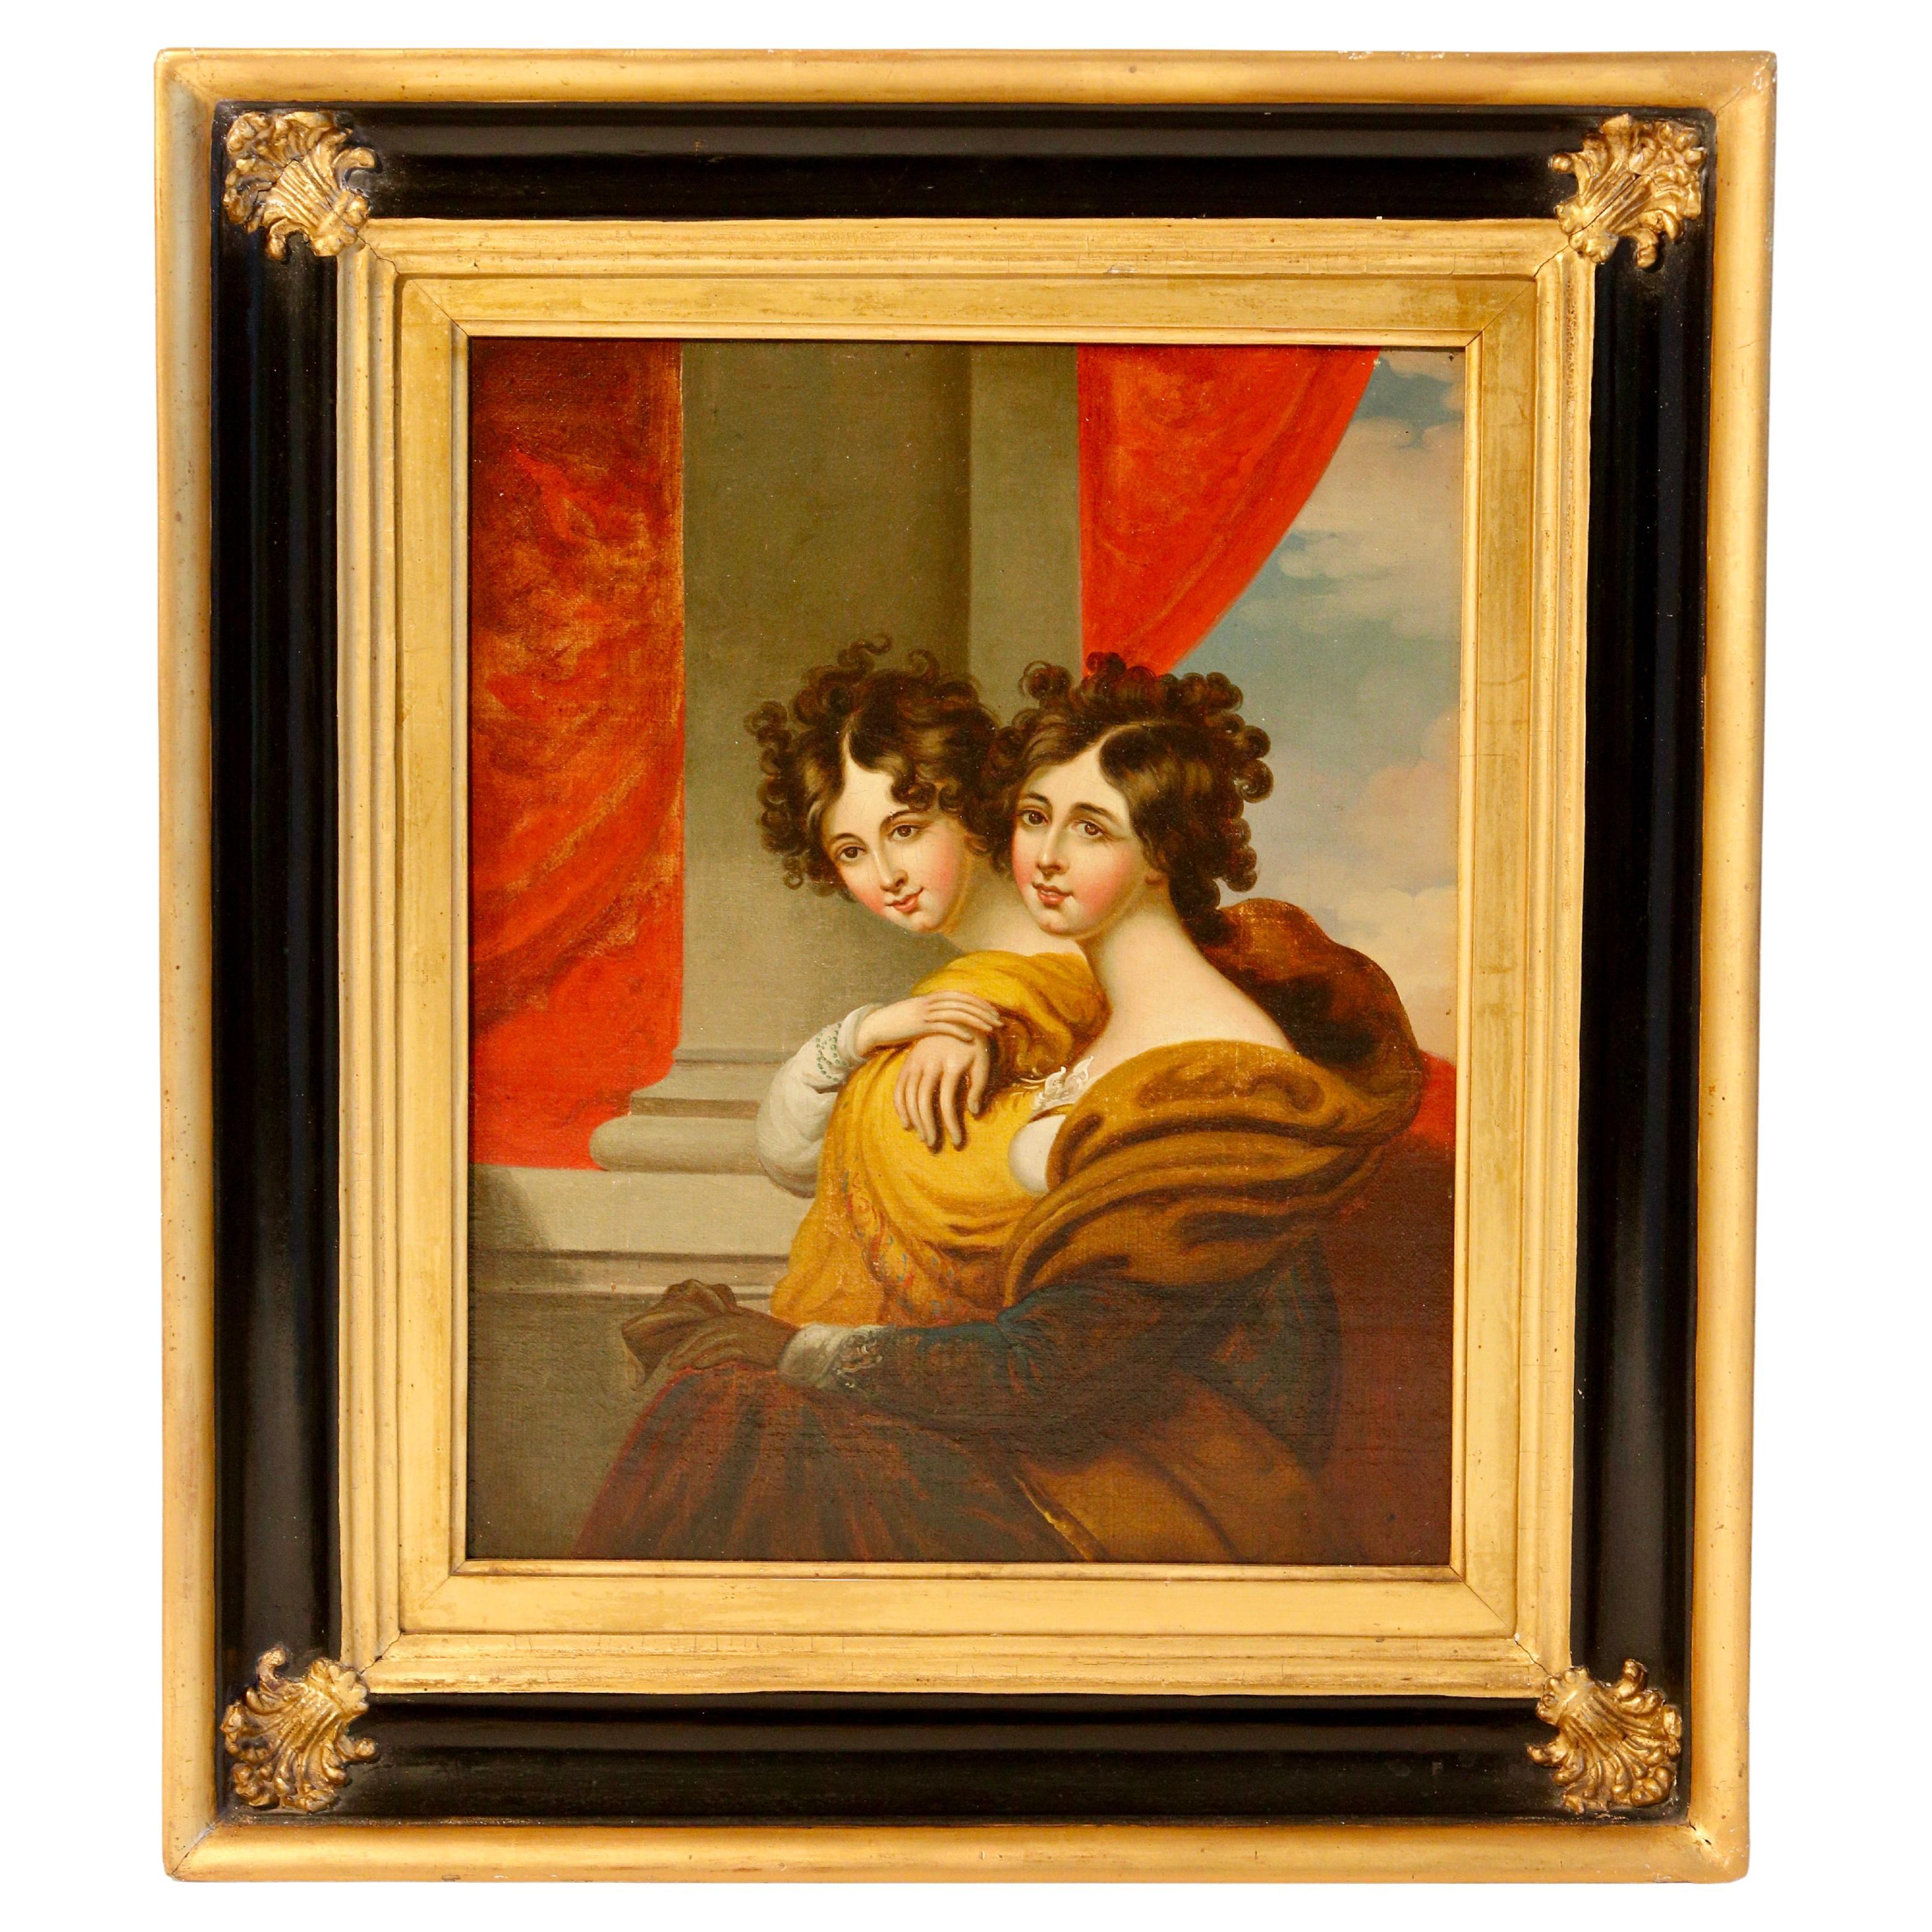 Oil Painting of Two Sisters in the Manner of George Henry Harlow 19th C